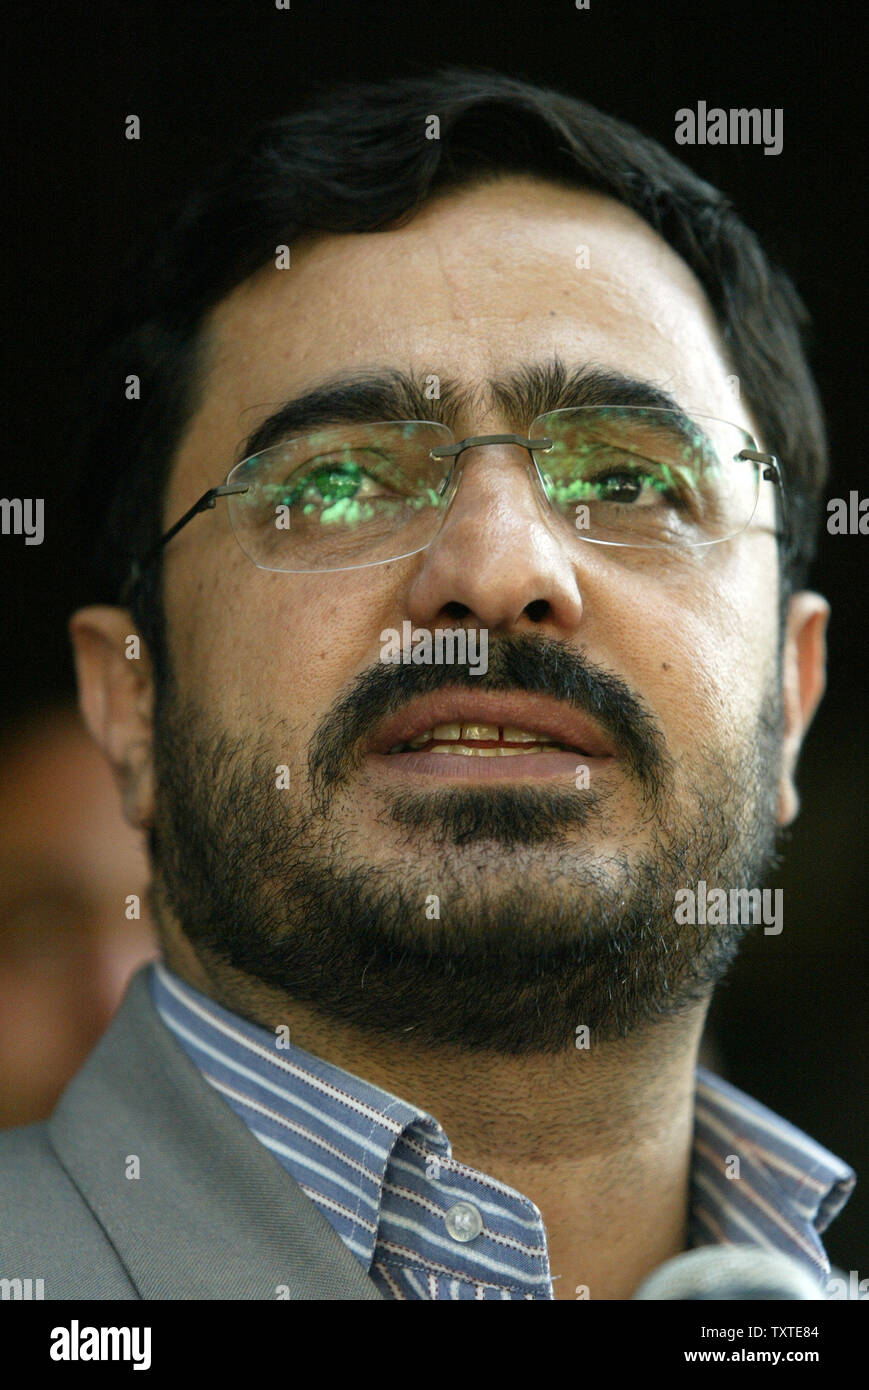 Tehran chief prosecutor Saeed Mortazavi speaks to media before the murderers of Hassan Moghaddas, a hardline deputy prosecutor and head of the 'guidance' court in Tehran, are publicly hanged in central Tehran, Iran on August 2, 2007. (UPI Photo/Mohammad Kheirkhah) Stock Photo